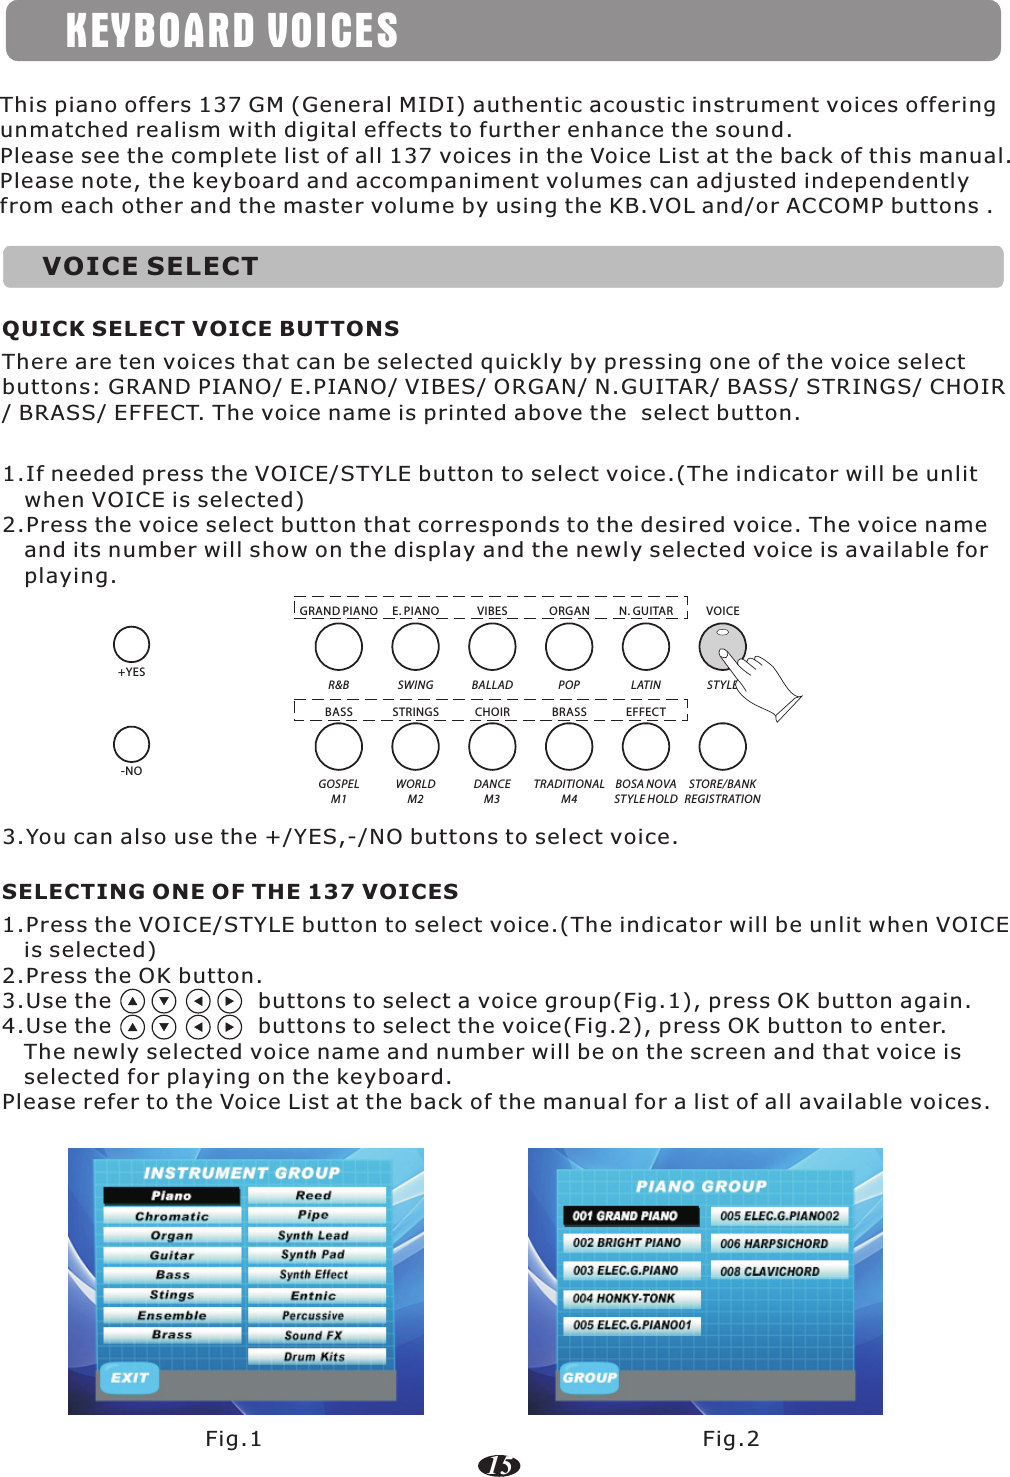 KEYBOARD VOICESVOICE SELECTThis piano offers 137 GM (General MIDI) authentic acoustic instrument voices offering unmatched realism with digital effects to further enhance the sound.Please see the complete list of all 137 voices in the Voice List at the back of this manual.Please note, the keyboard and accompaniment volumes can adjusted independently from each other and the master volume by using the KB.VOL and/or ACCOMP buttons .1.If needed press the VOICE/STYLE button to select voice.(The indicator will be unlit    when VOICE is selected)2.Press the voice select button that corresponds to the desired voice. The voice name    and its number will show on the display and the newly selected voice is available for    playing.There are ten voices that can be selected quickly by pressing one of the voice select buttons: GRAND PIANO/ E.PIANO/ VIBES/ ORGAN/ N.GUITAR/ BASS/ STRINGS/ CHOIR/ BRASS/ EFFECT. The voice name is printed above the  select button.QUICK SELECT VOICE BUTTONSR&amp;B SWING BALLAD POP LATIN ST YLEGOSPELM1WORLDM2DANCEM3TRADITIONALM4BOSA NOVAST YLE HOLDSTORE/BANKREGISTRATIONGRAND PIANOBASSE. PIANO VIBES ORGAN N. GUITAR VOICESTRINGS CHOIR BRASS EFFECT1.Press the VOICE/STYLE button to select voice.(The indicator will be unlit when VOICE    is selected)2.Press the OK button.3.Use the                    buttons to select a voice group(Fig.1), press OK button again.      4.Use the                    buttons to select the voice(Fig.2), press OK button to enter.    The newly selected voice name and number will be on the screen and that voice is    selected for playing on the keyboard.Please refer to the Voice List at the back of the manual for a list of all available voices.SELECTING ONE OF THE 137 VOICESFig.1 Fig.215+YES-NO3.You can also use the +/YES,-/NO buttons to select voice.